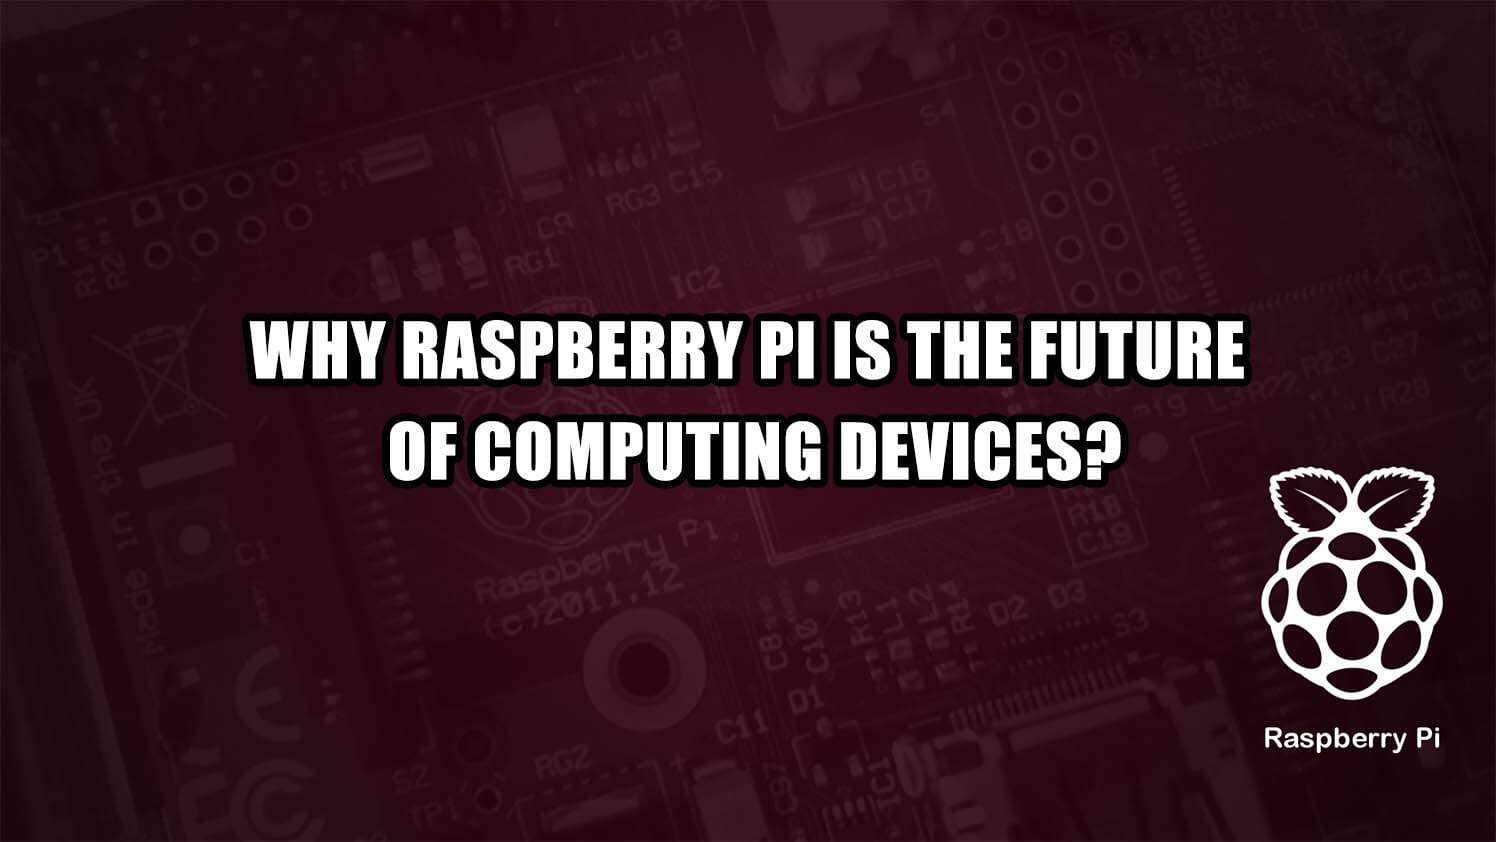 Why Raspberry Pi is the future of computing devices?